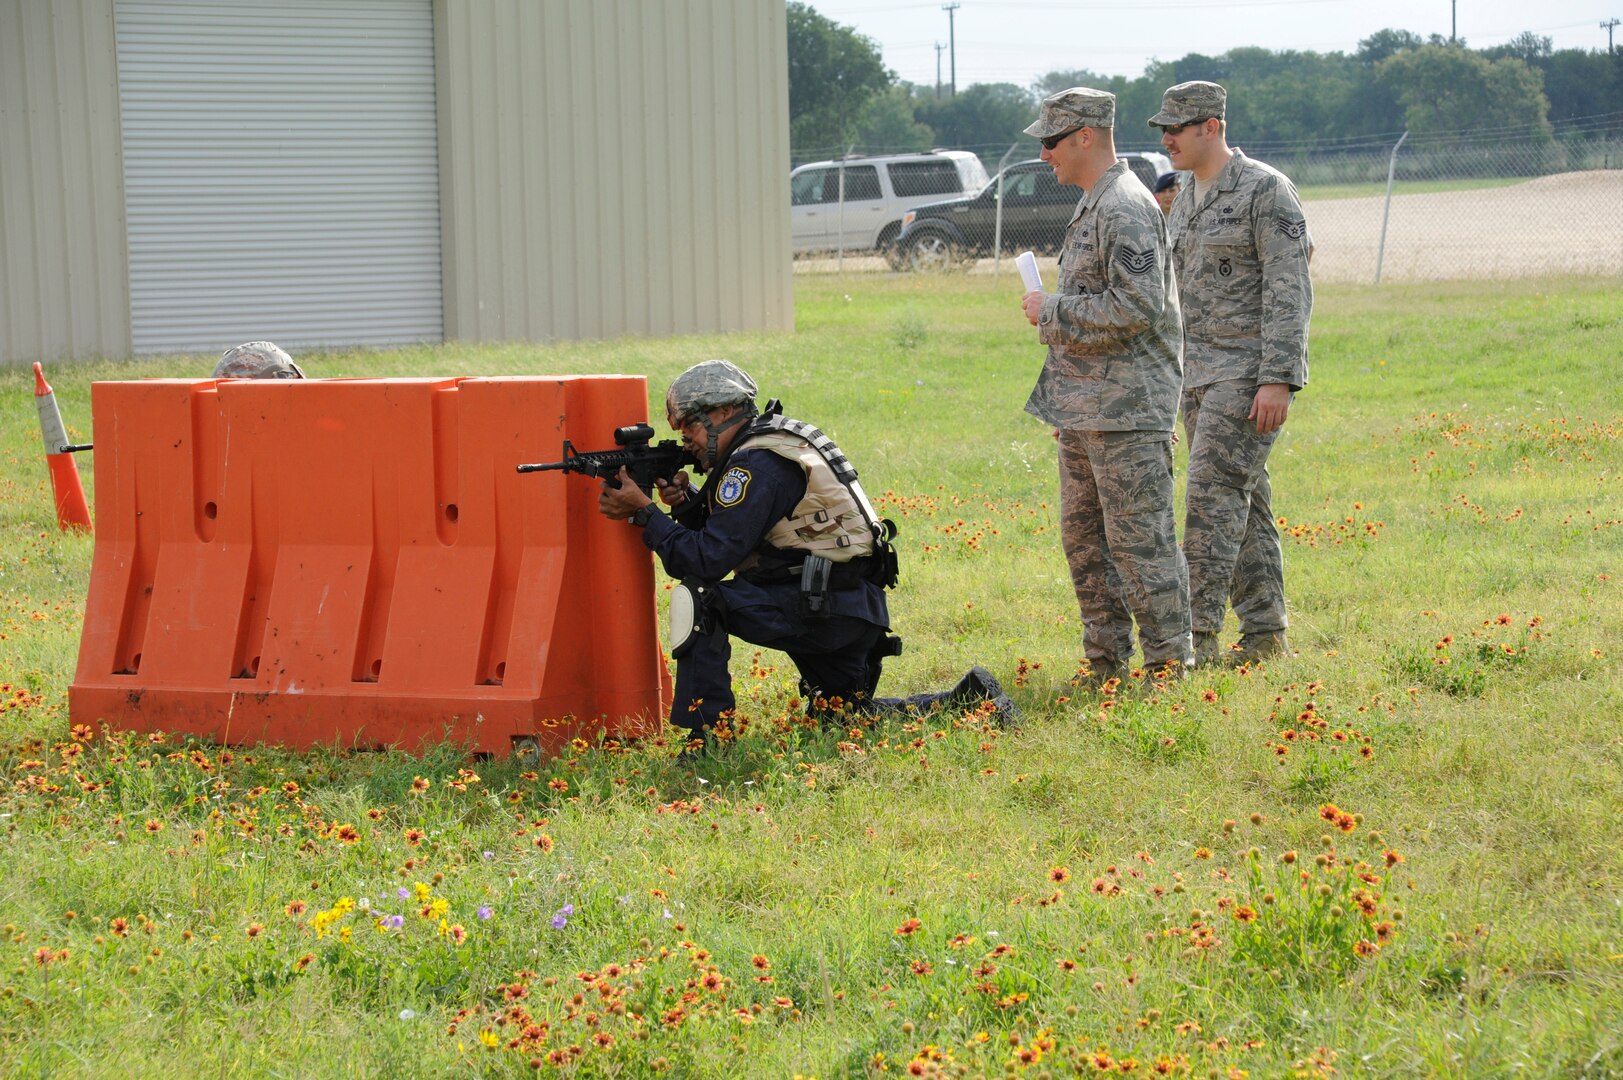 Instructors from the  902nd Security Forces Squadron provide guidance to officer Agapito Delarosa, 902nd SFS installation patrolman as he  prepares to shoot at his target  during Shoot, Move and Communicate training at Camp Talon on Joint Base San Antonio- Randolph, June 7.  (U.S. Air Force Photo by Don Lindsey)
Airman 1st Class Carl Martin, 902nd Security Forces Squadron, installation police officer fires his M-4 assault rifle at his target during Shoot, Move and Communicate training at Camp Talon on Joint Base San Antonio- Randolph, June 7.  (U.S. Air Force Photo by Don Lindsey)
